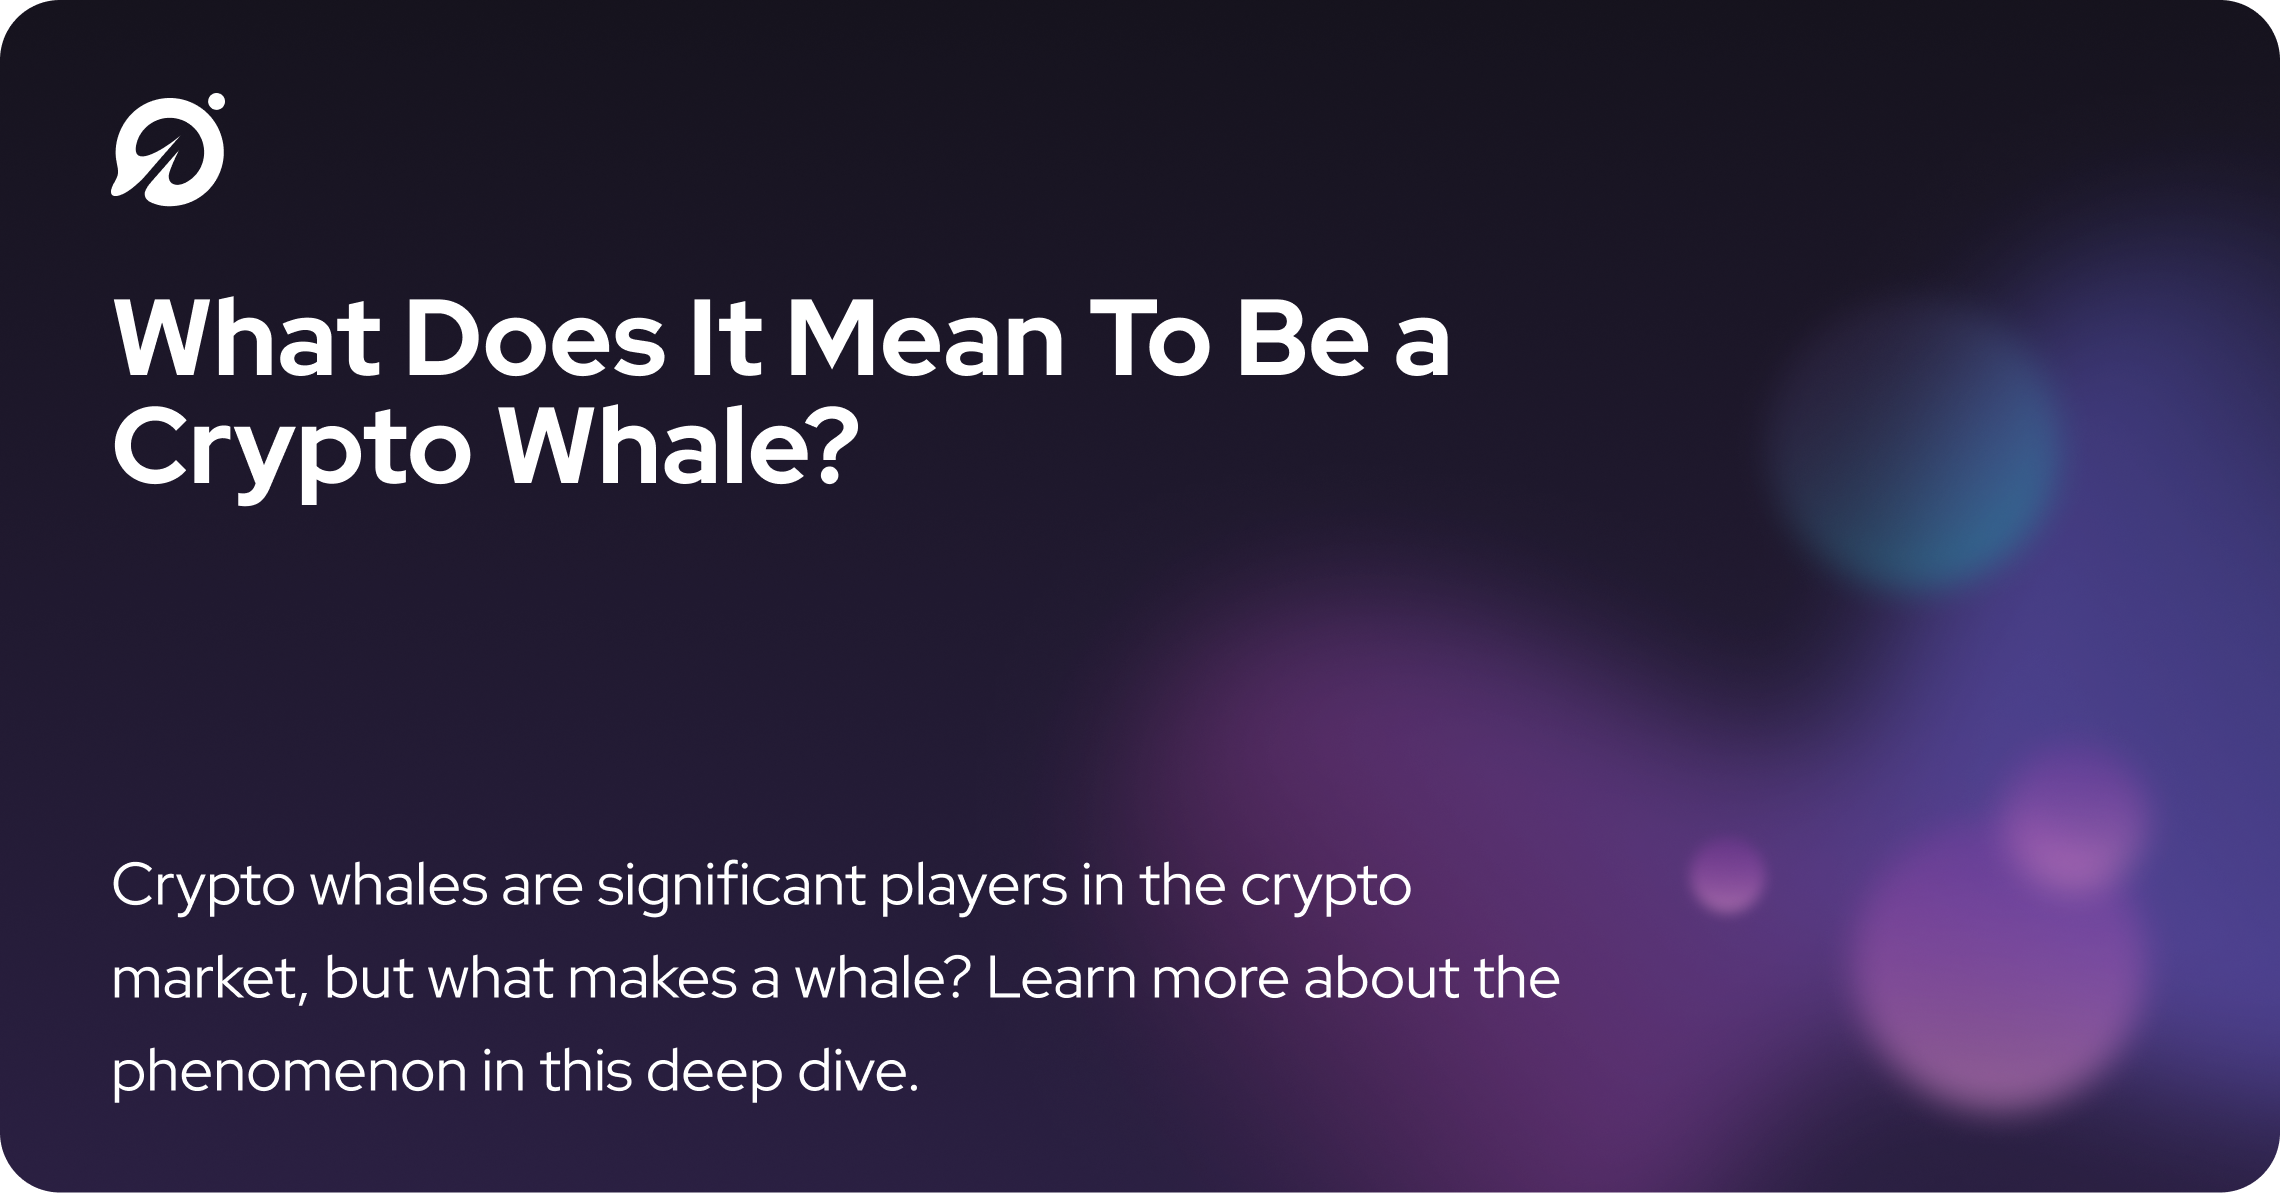 What Does It Mean To Be a Crypto Whale?